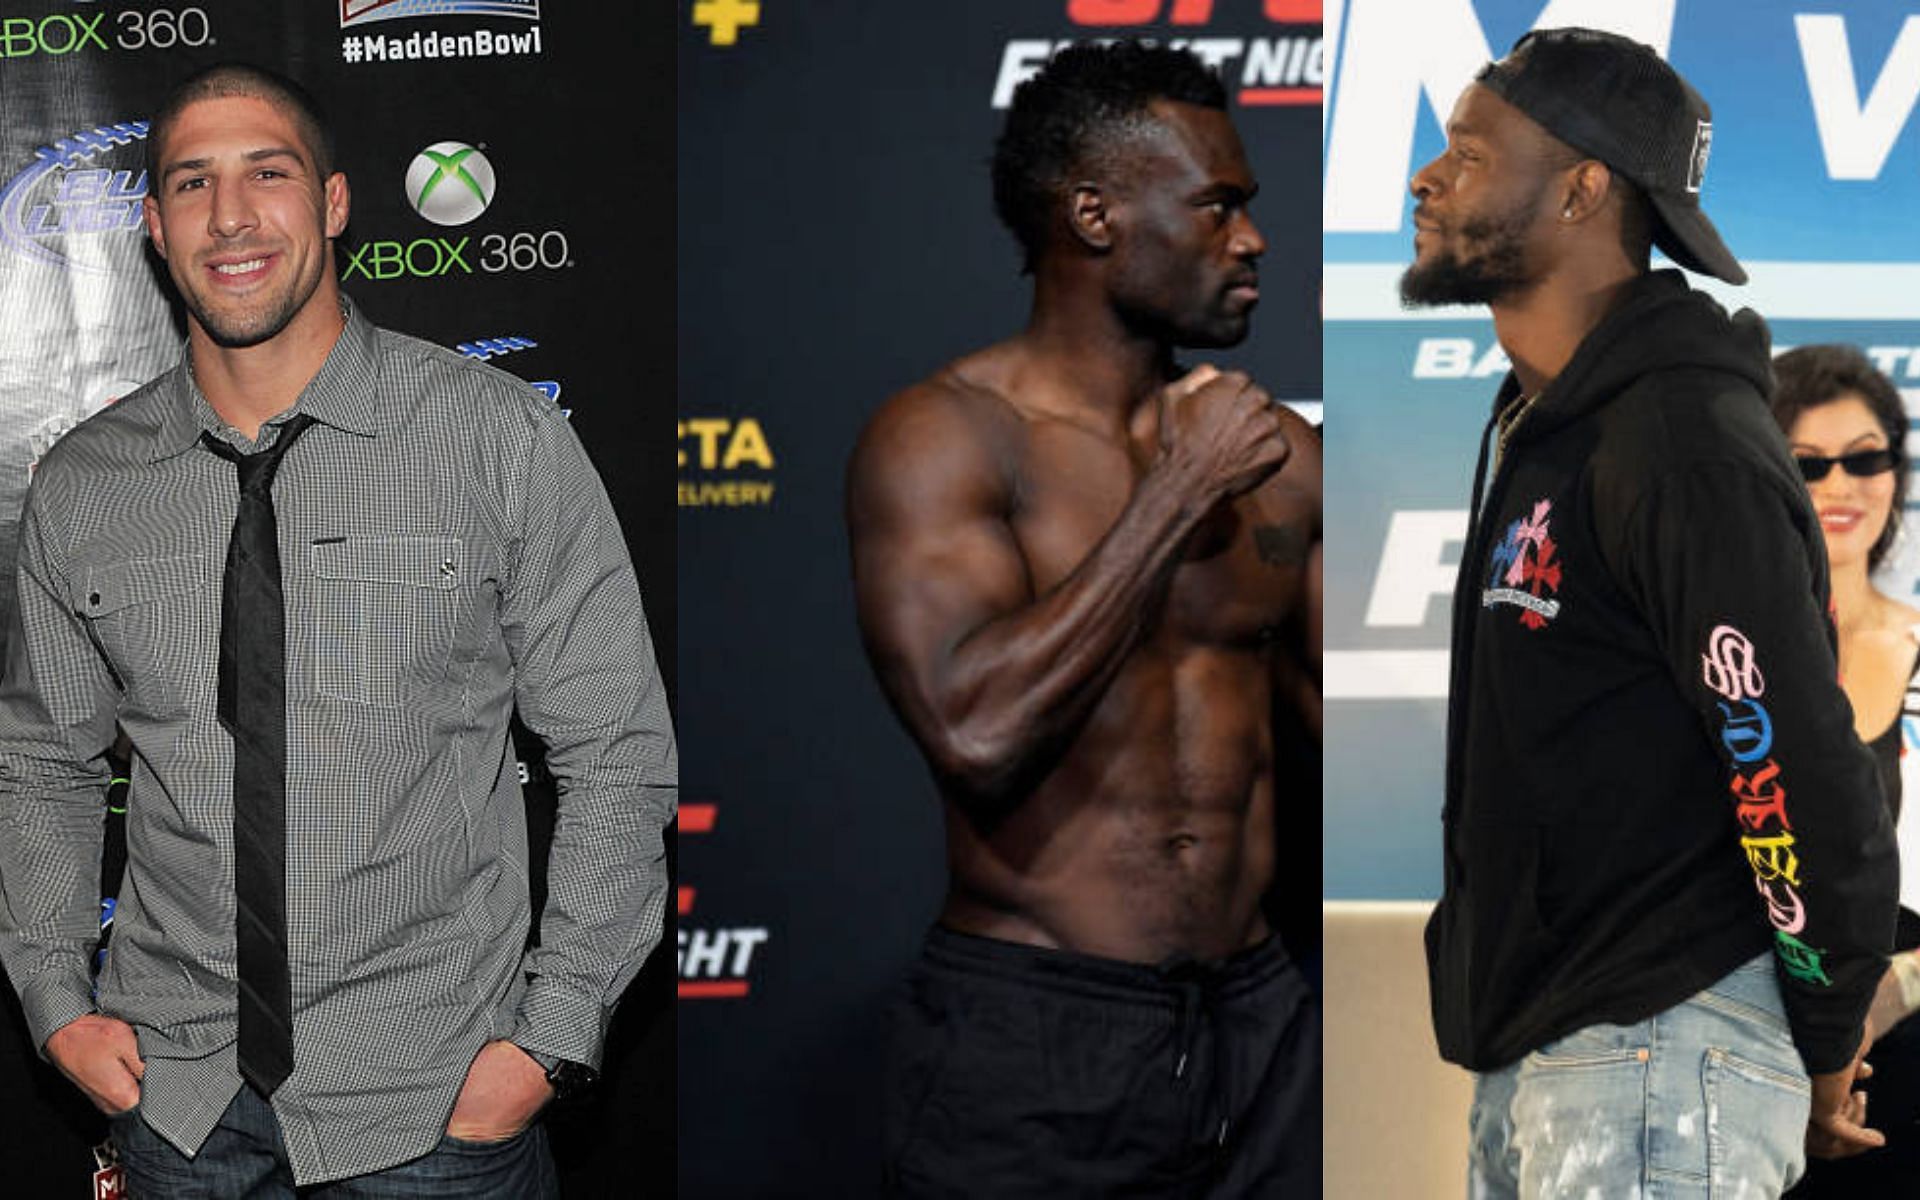 From left to right: Brendan Schaub, Uriah Hall, Le